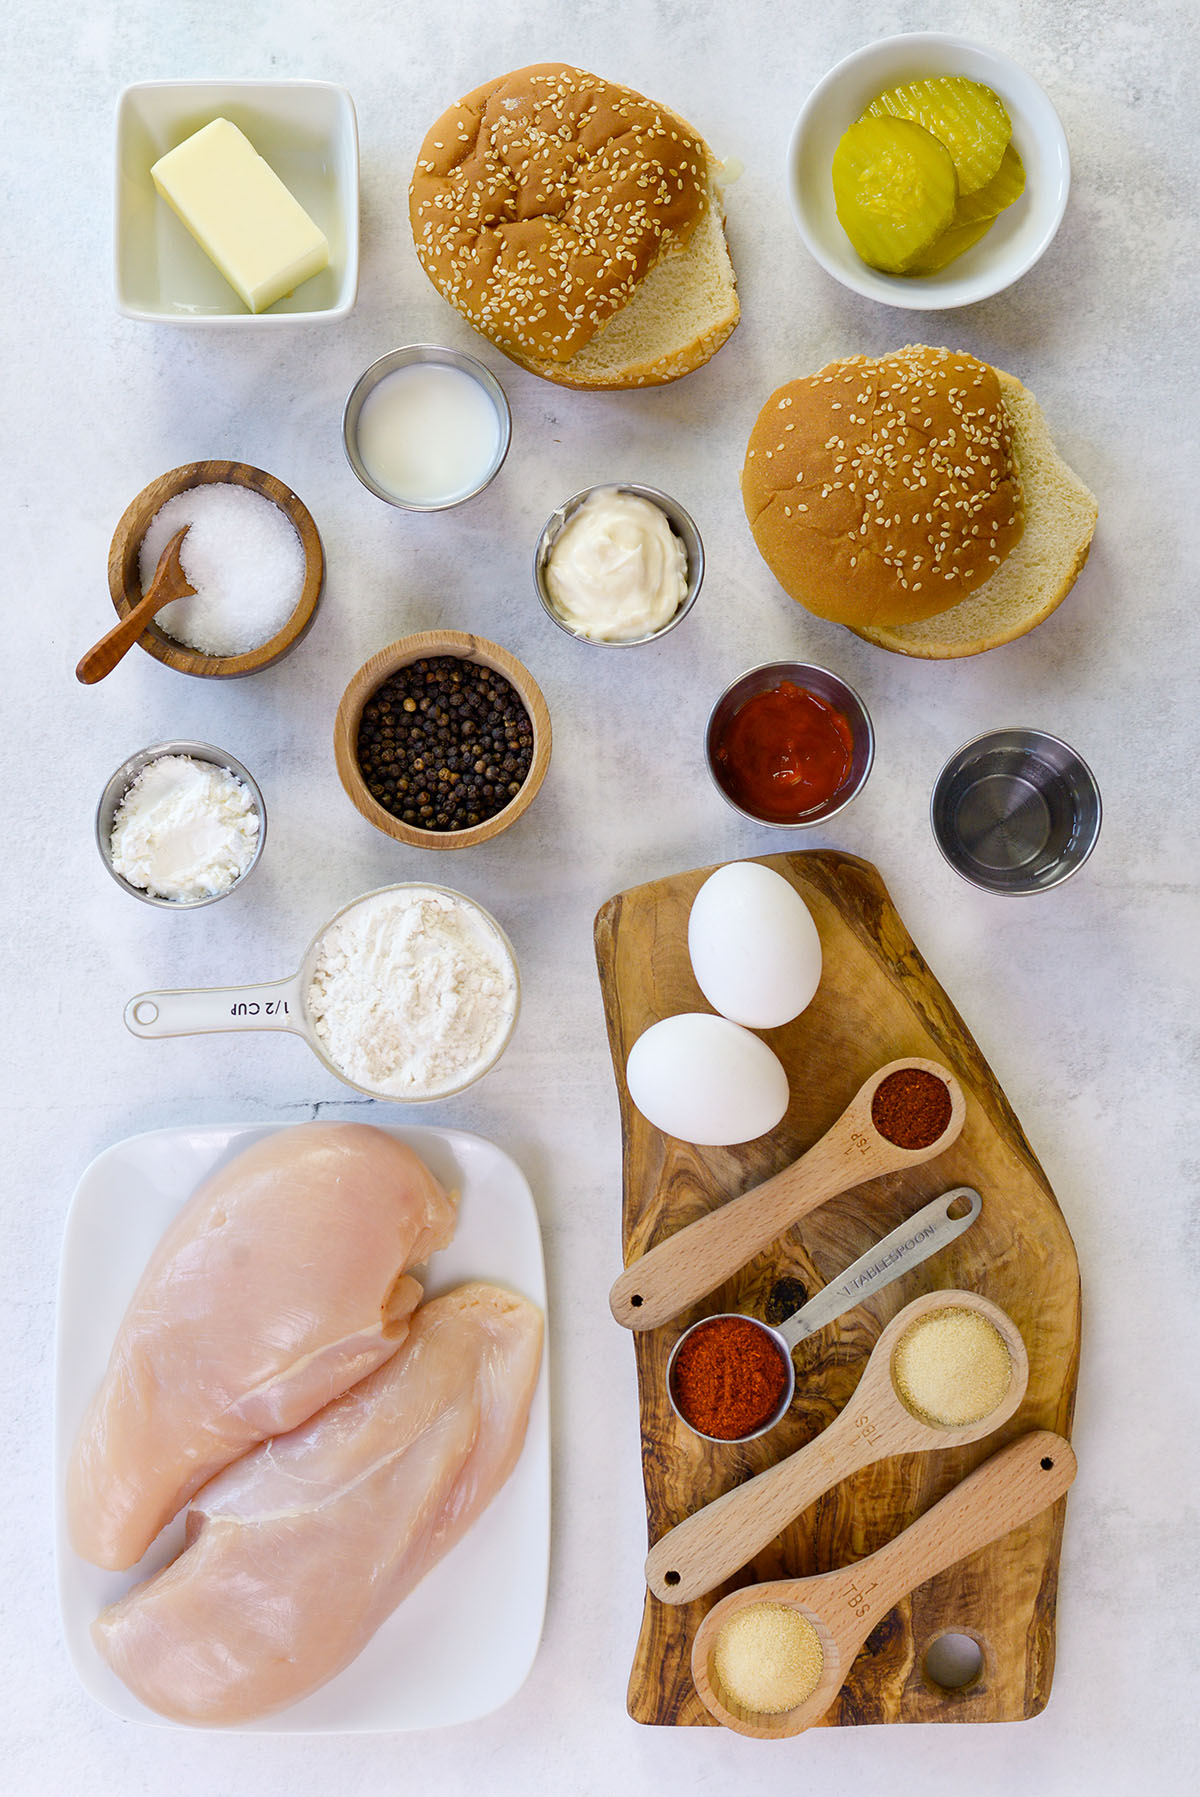 Ingredients for a chicken sandwich all spread out on a countertop.